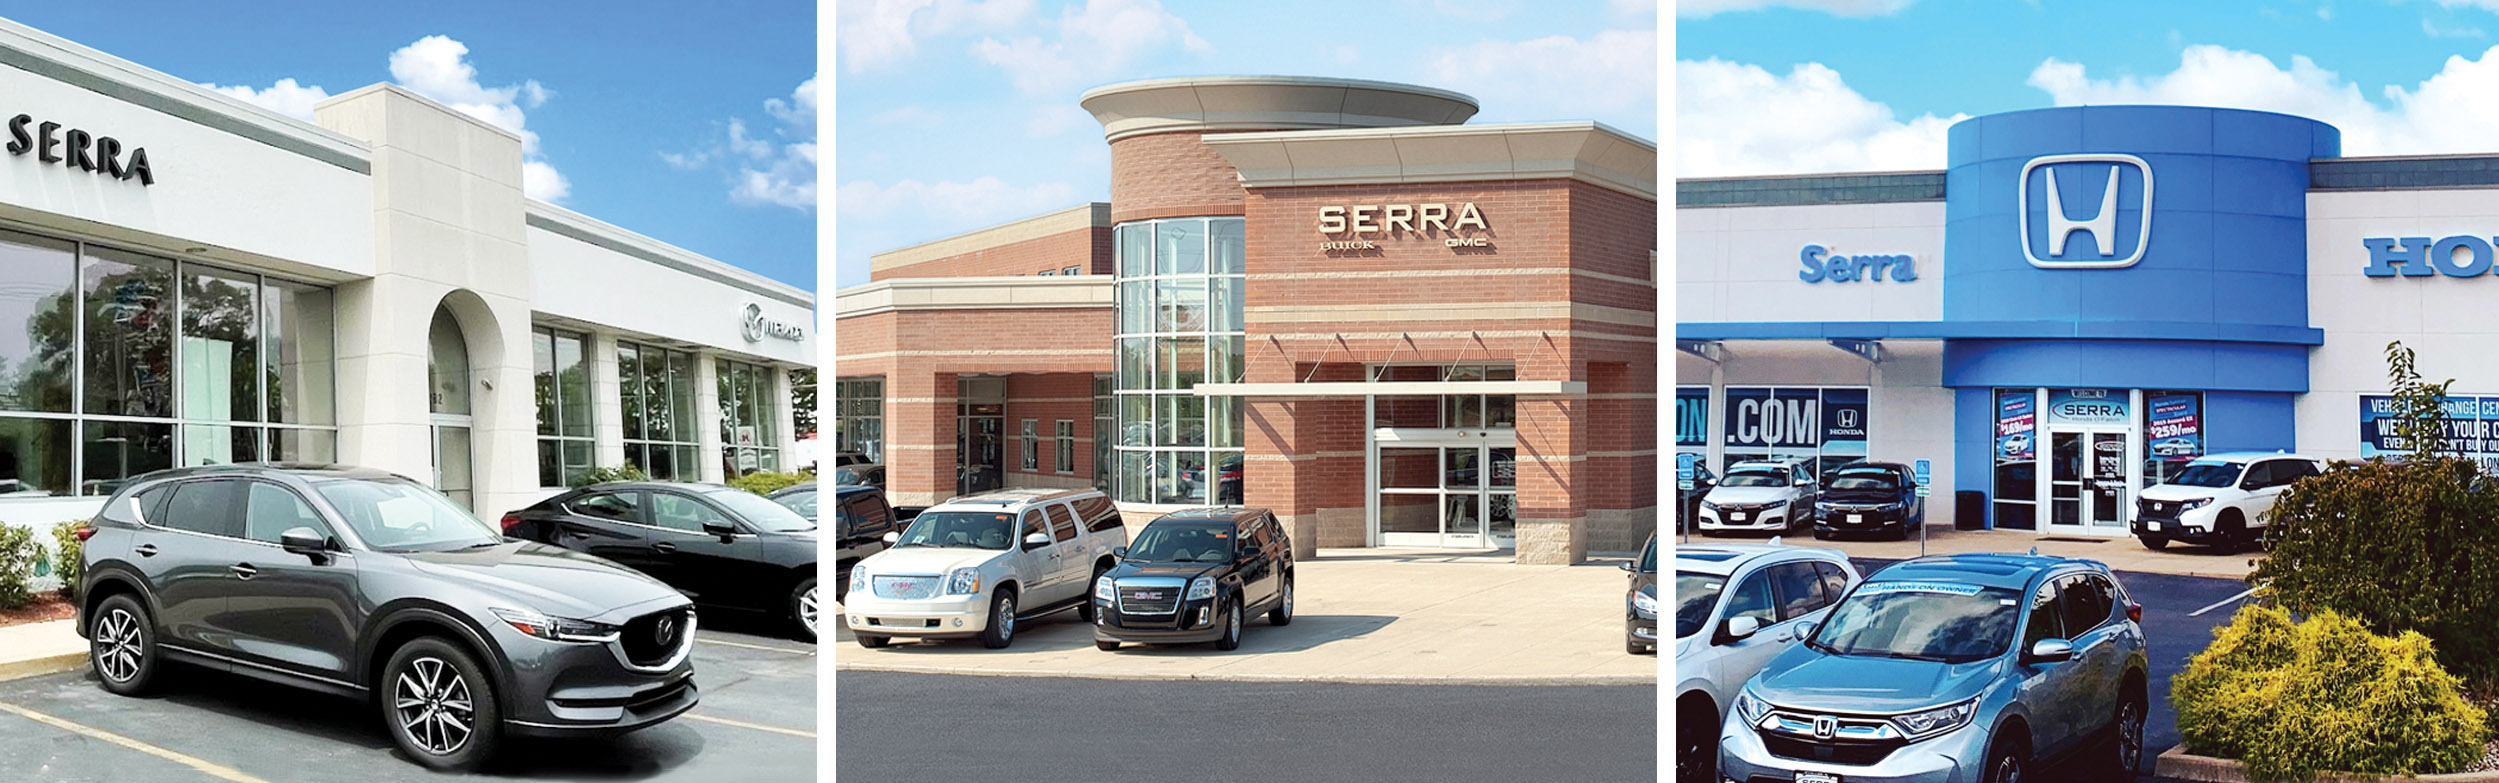 Outside view of three Al Serra Car dealerships from left to right: Mazda, Buick GMC and Honda.